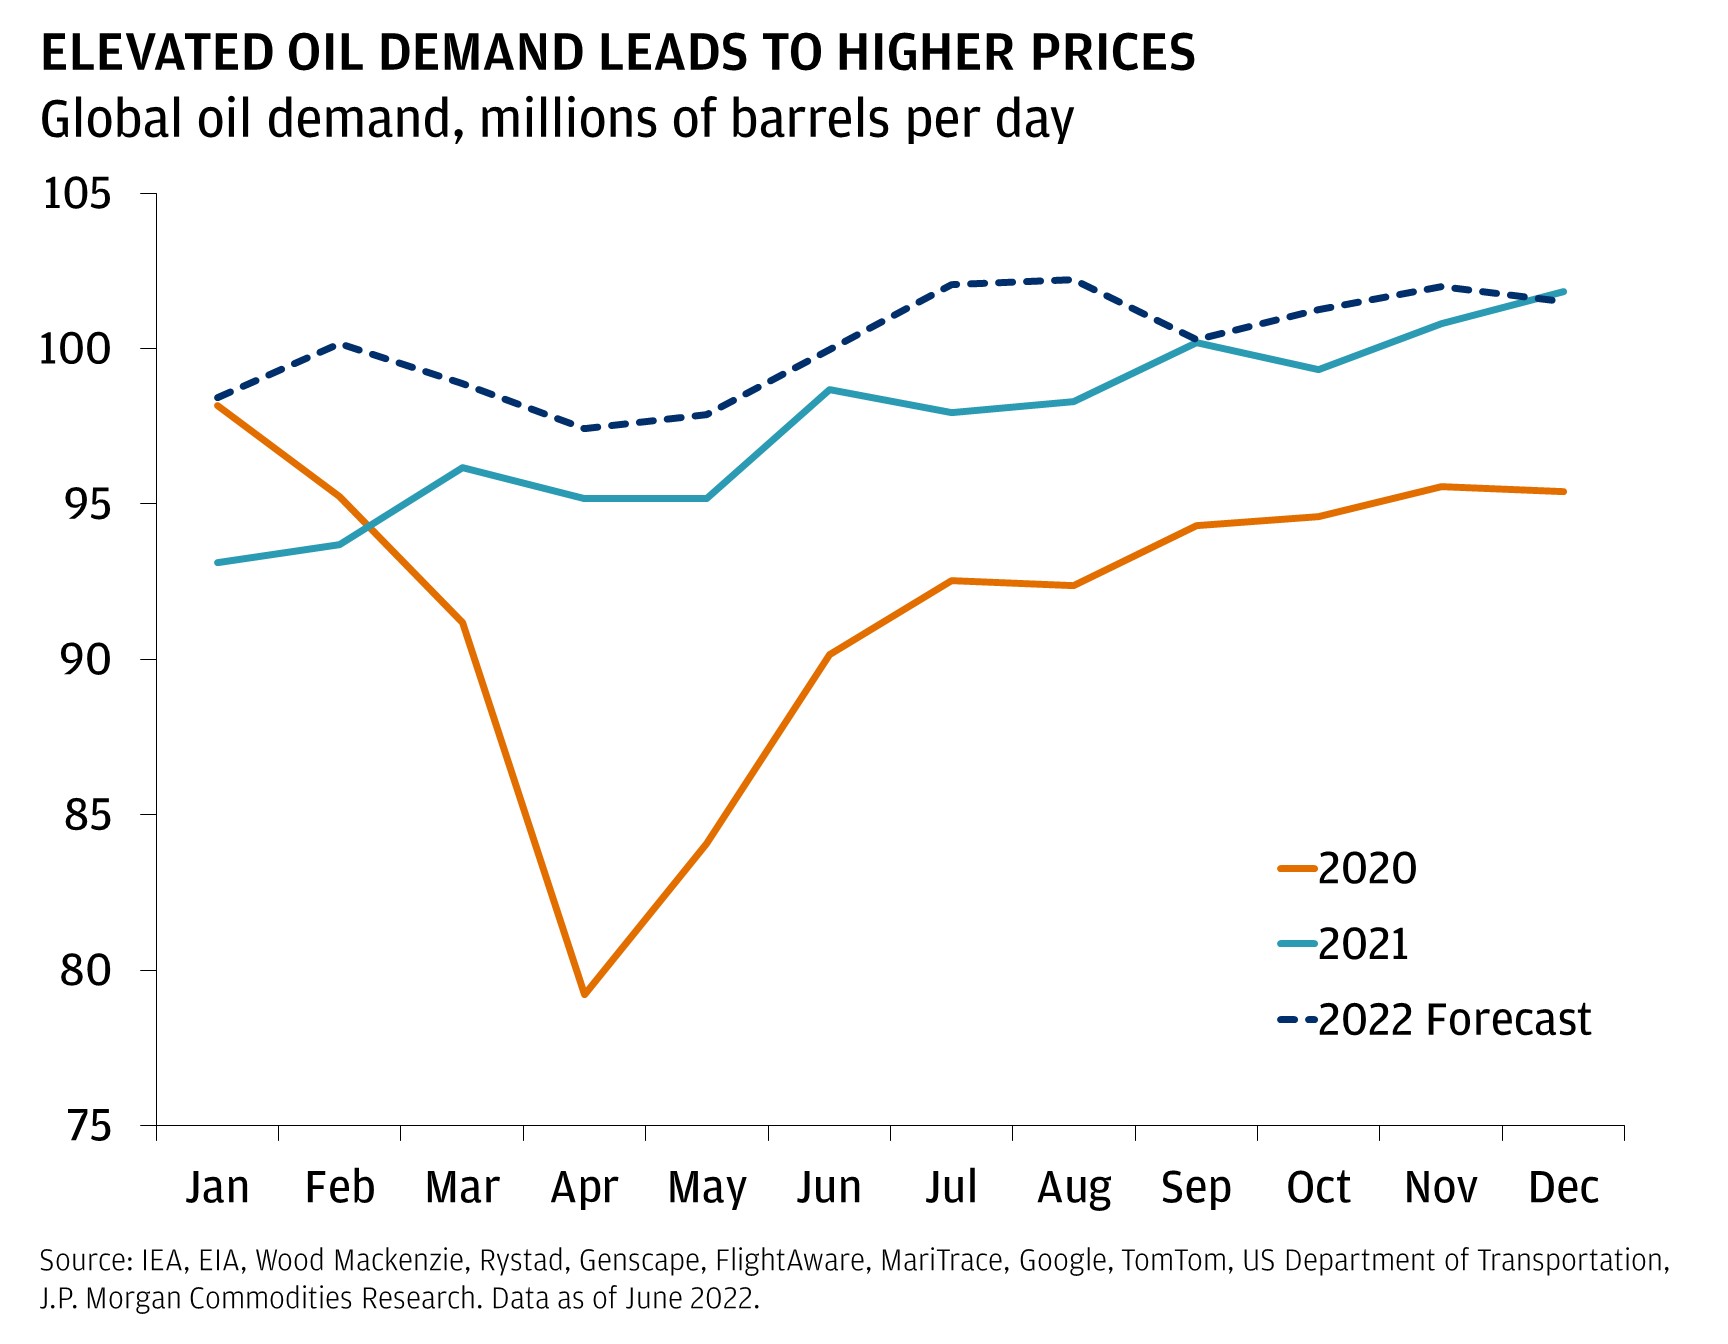 This chart shows the global oil demand in millions of barrels per day in 2020, 2021 and forecasted for 2022.